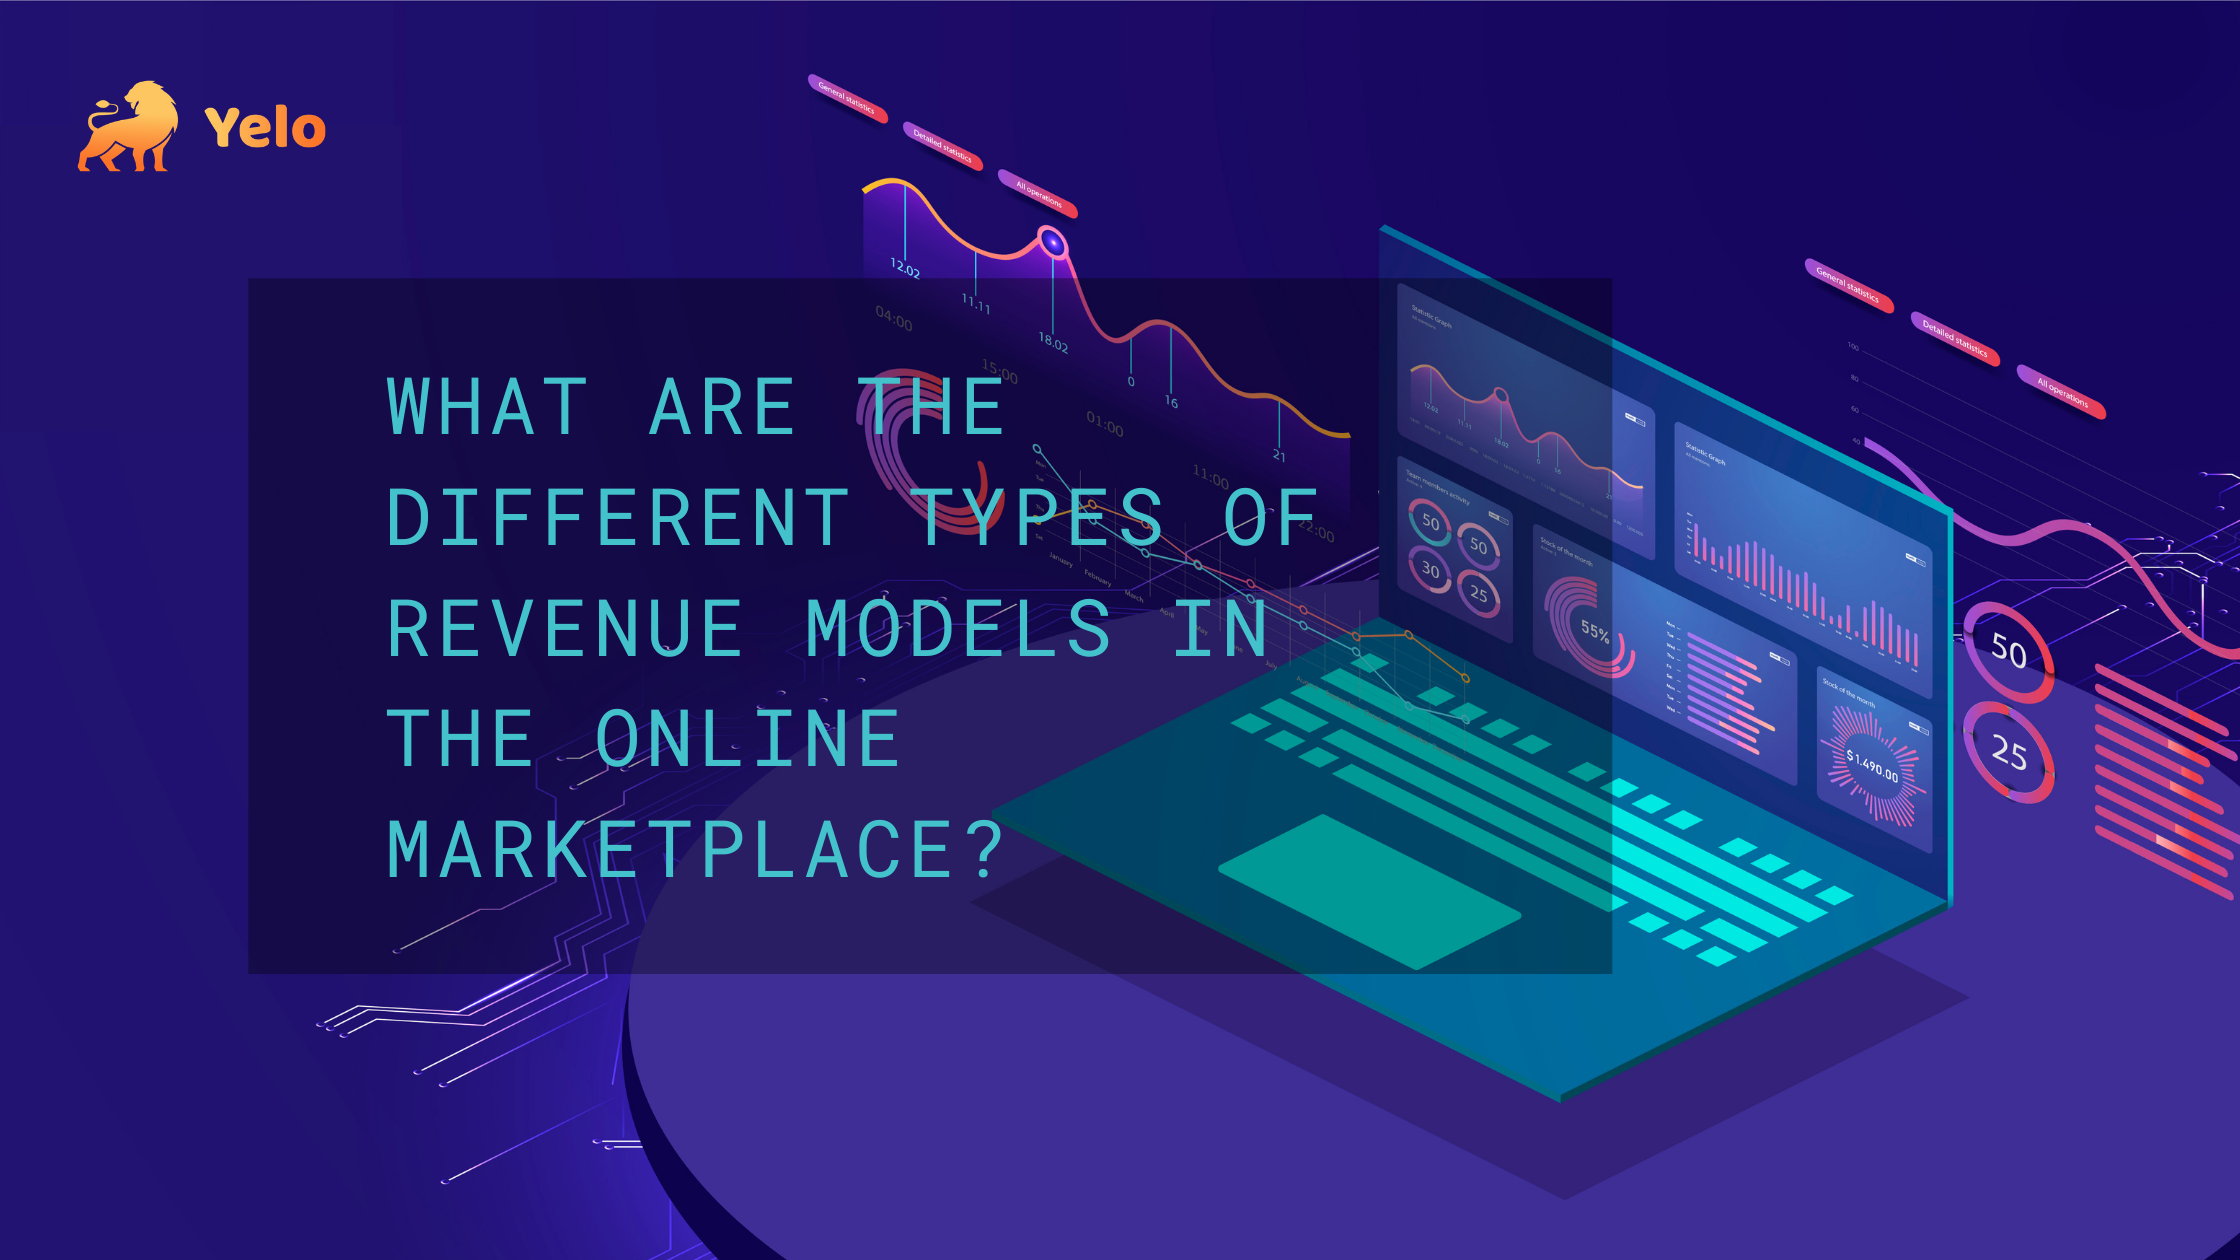 What are the different types of revenue models in the online marketplace?